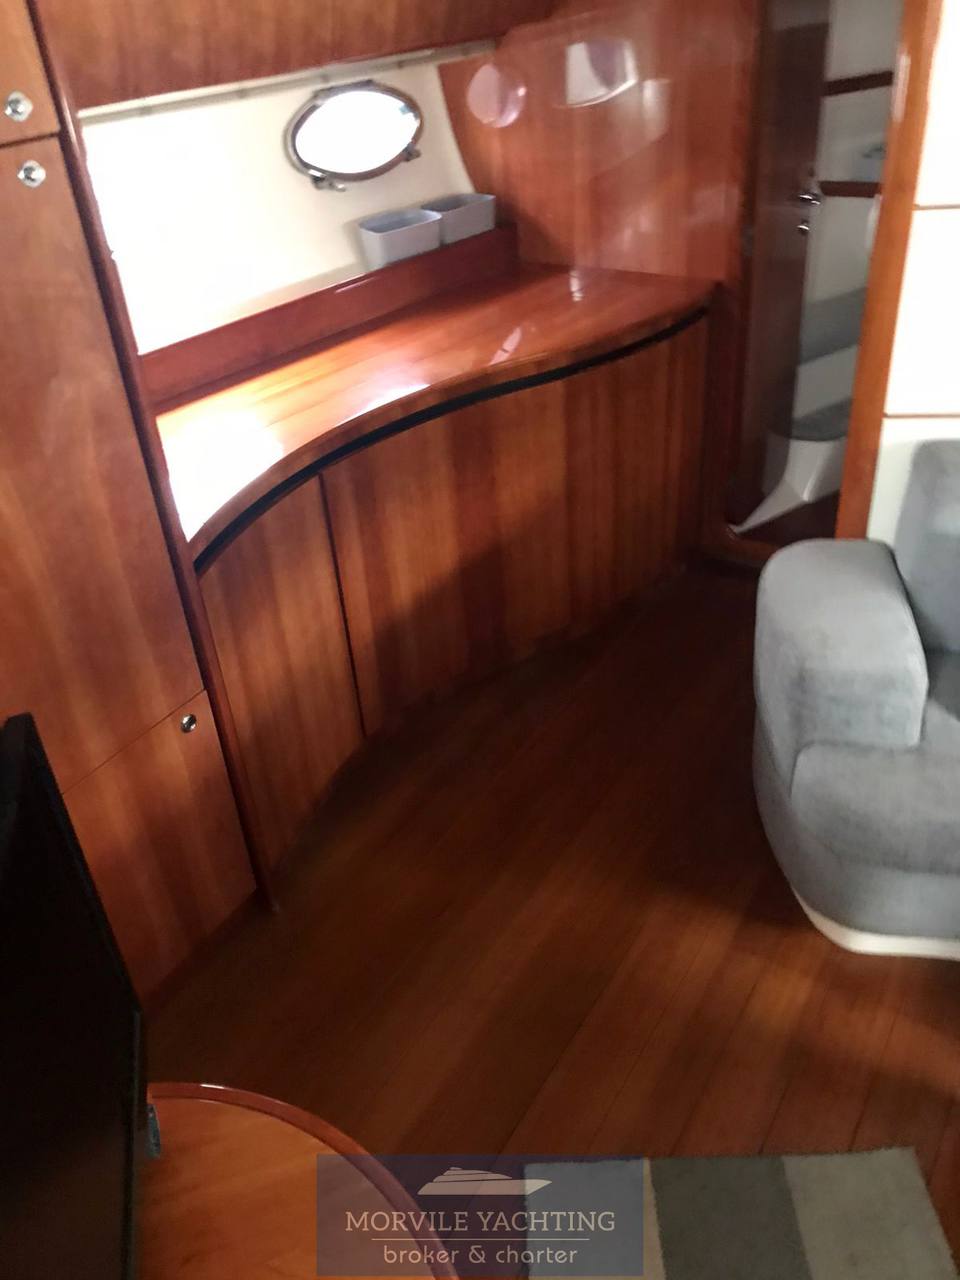 Pershing 46 Motor boat used for sale